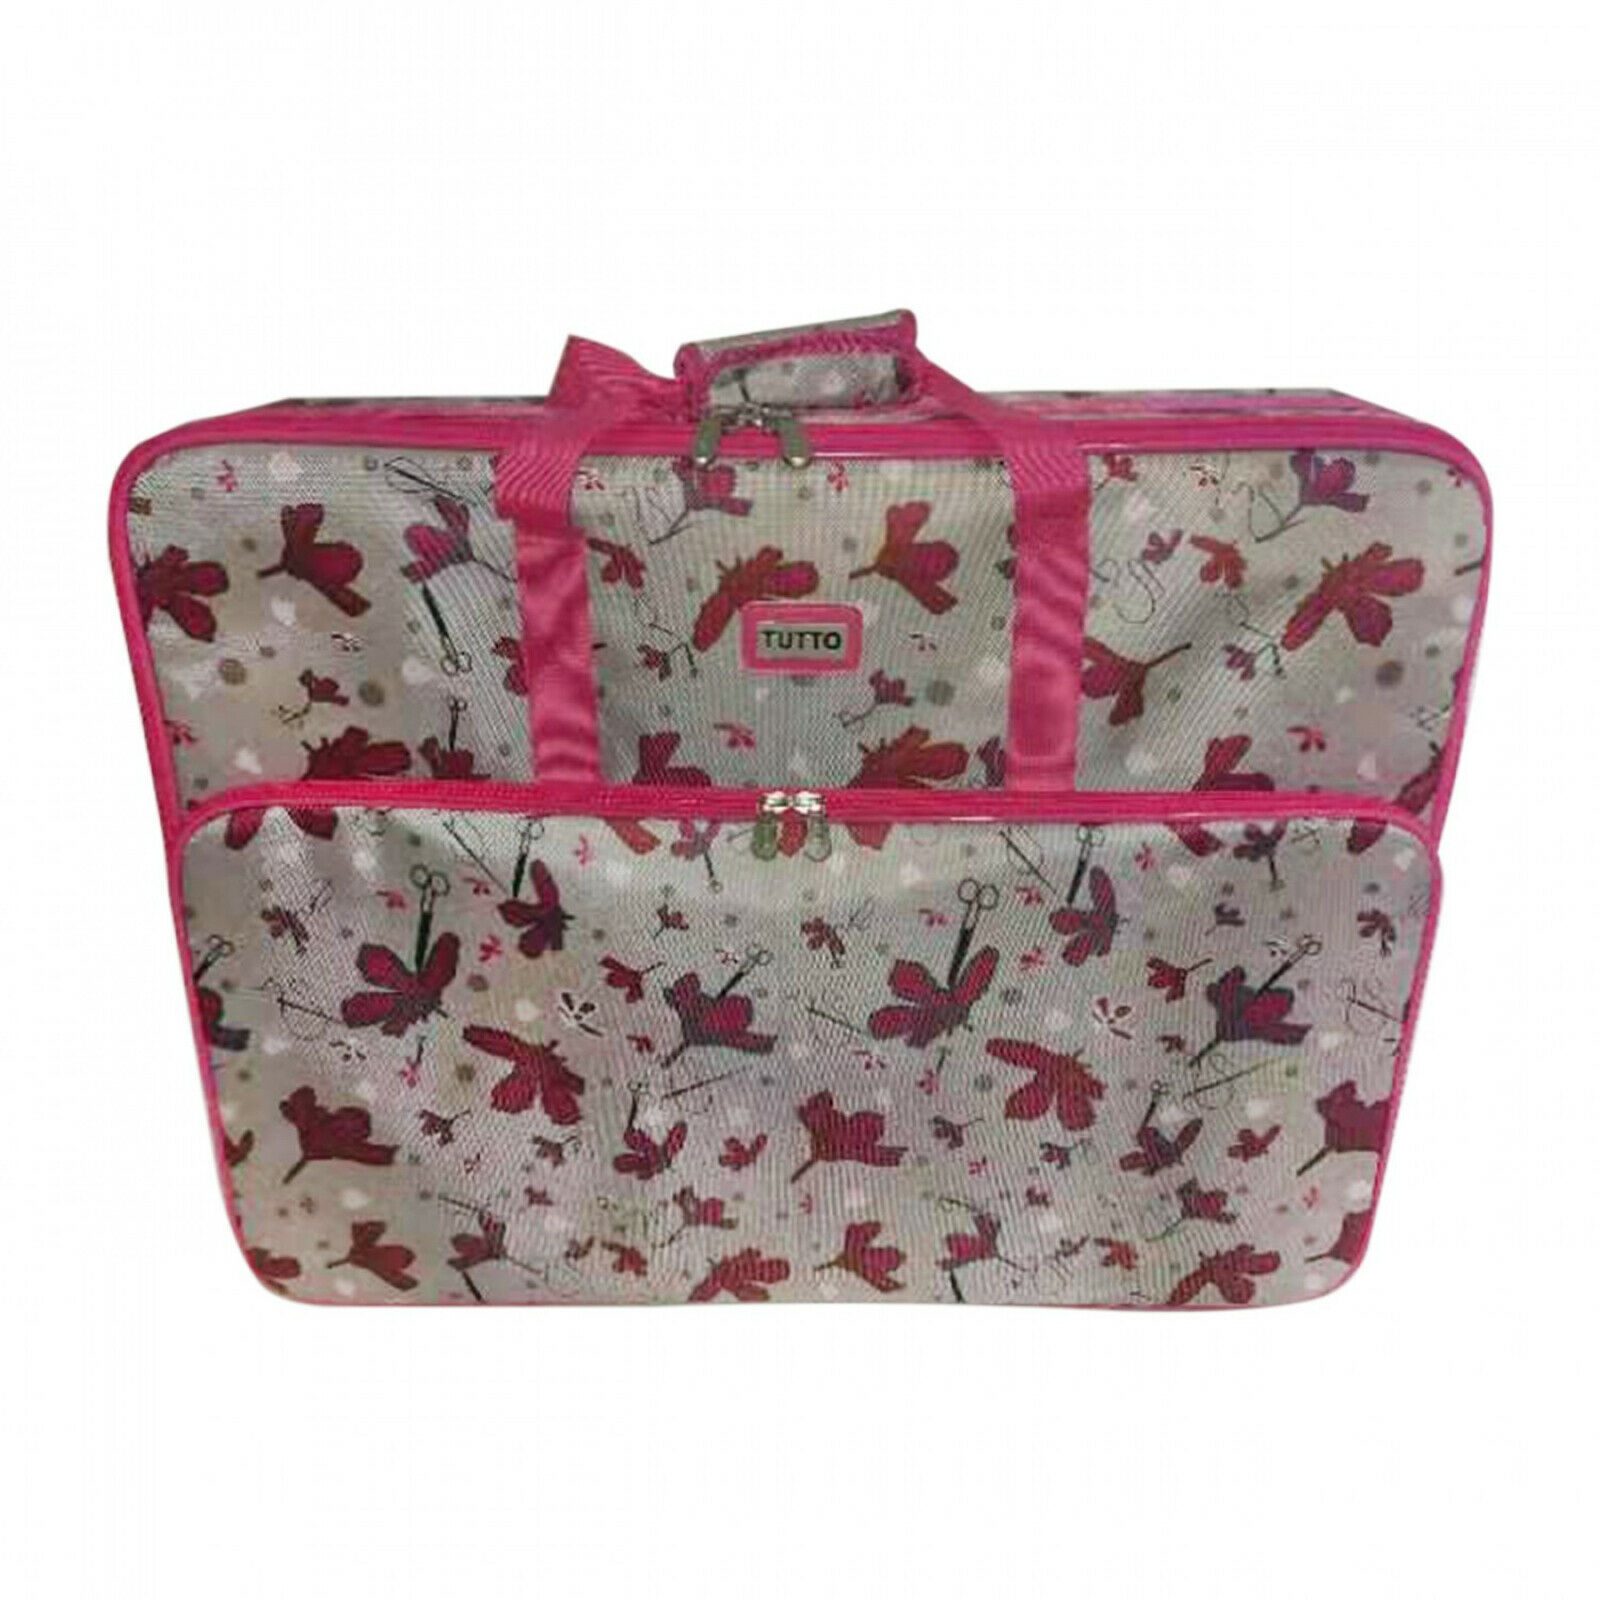 Tutto 1XL Embroidery Project Bag Rose Gray with Pink Daisies with Pink Trim - $225.86